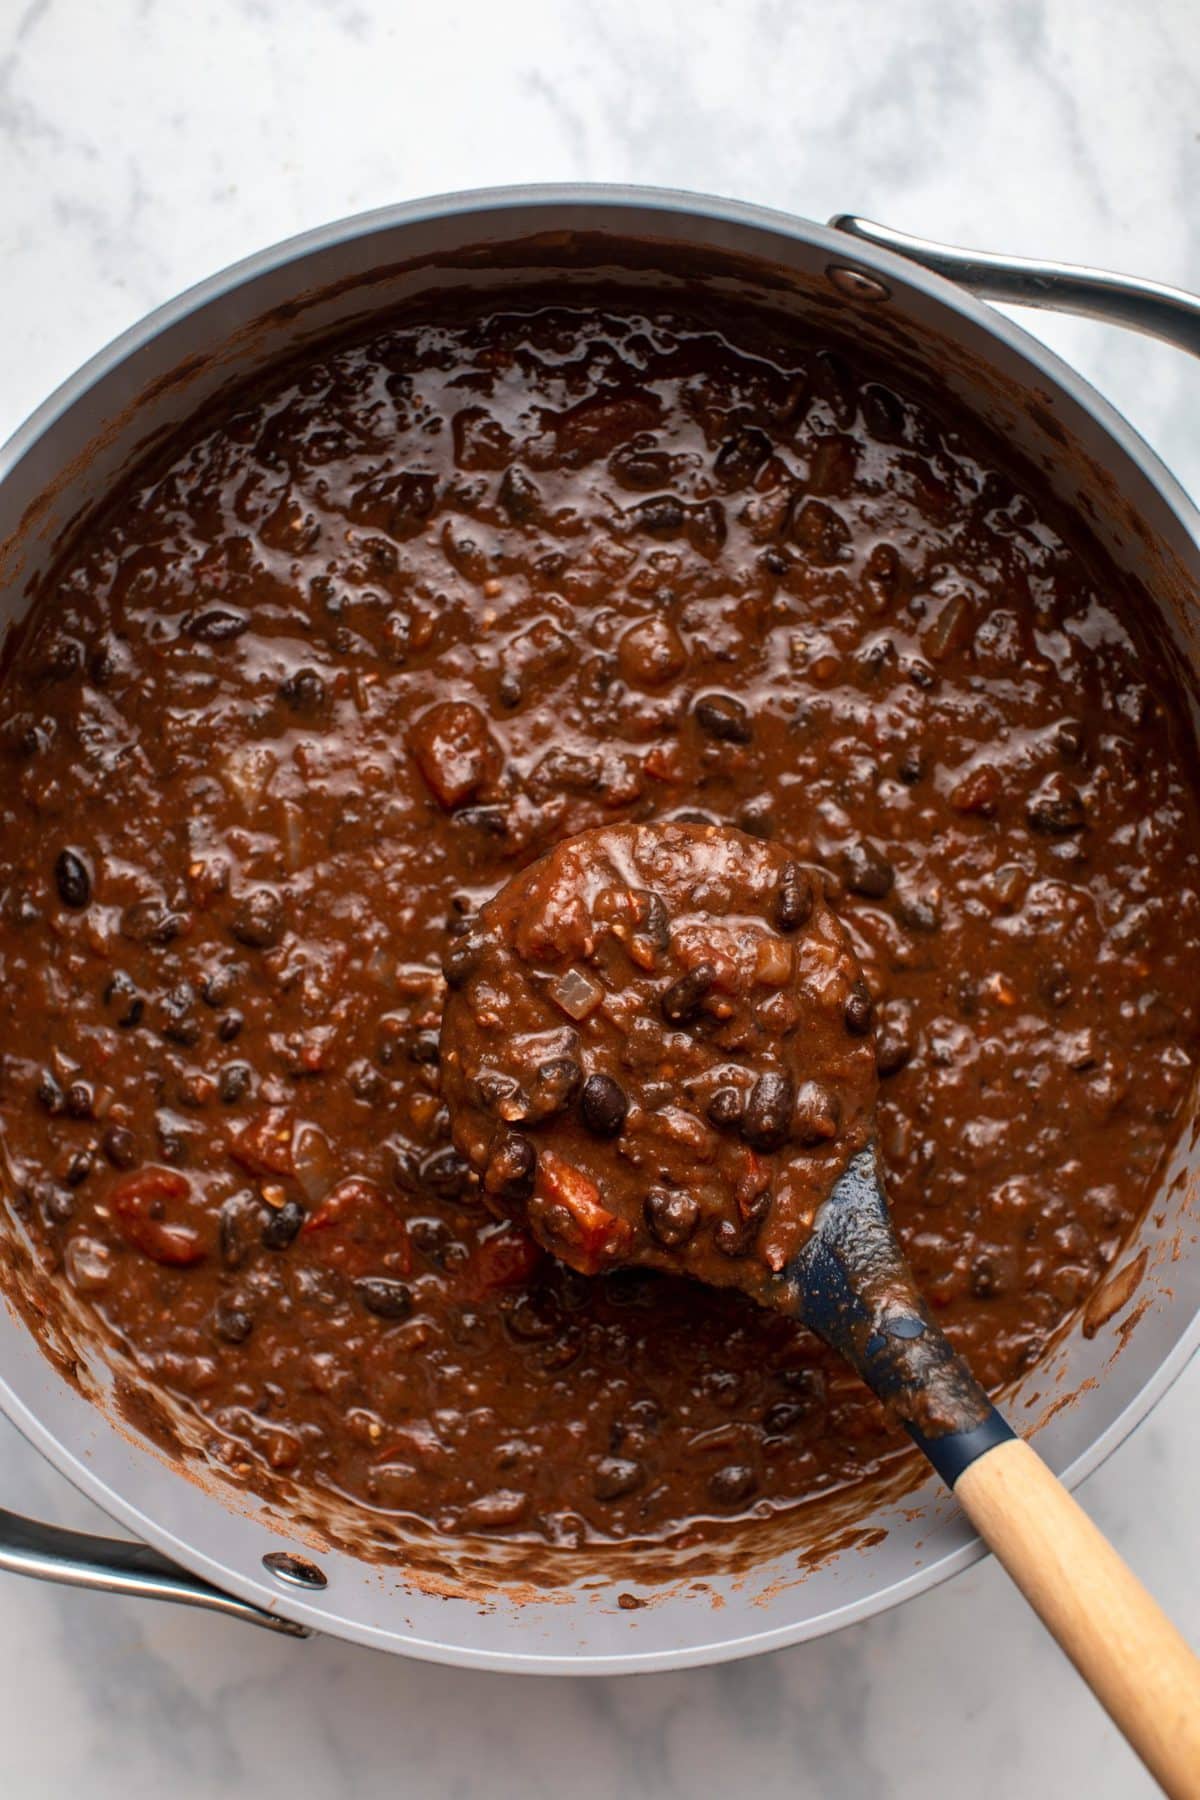 Large pot of black bean chili with wooden scoop scooping chili to show texture